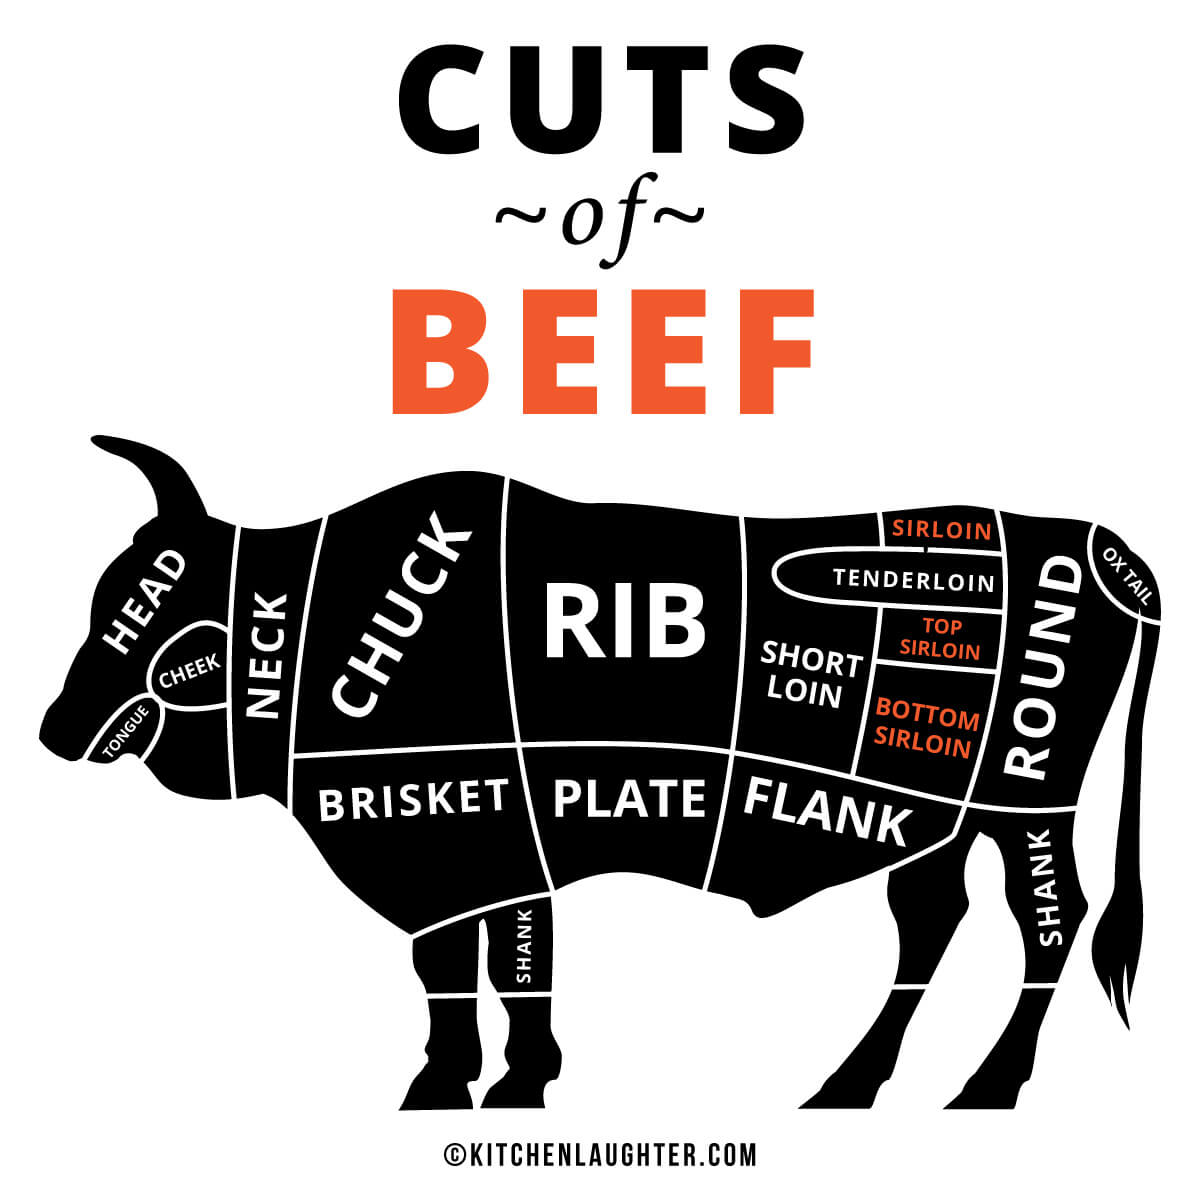 Graphic showing different cuts of beef with the sirloin area being highlighted.